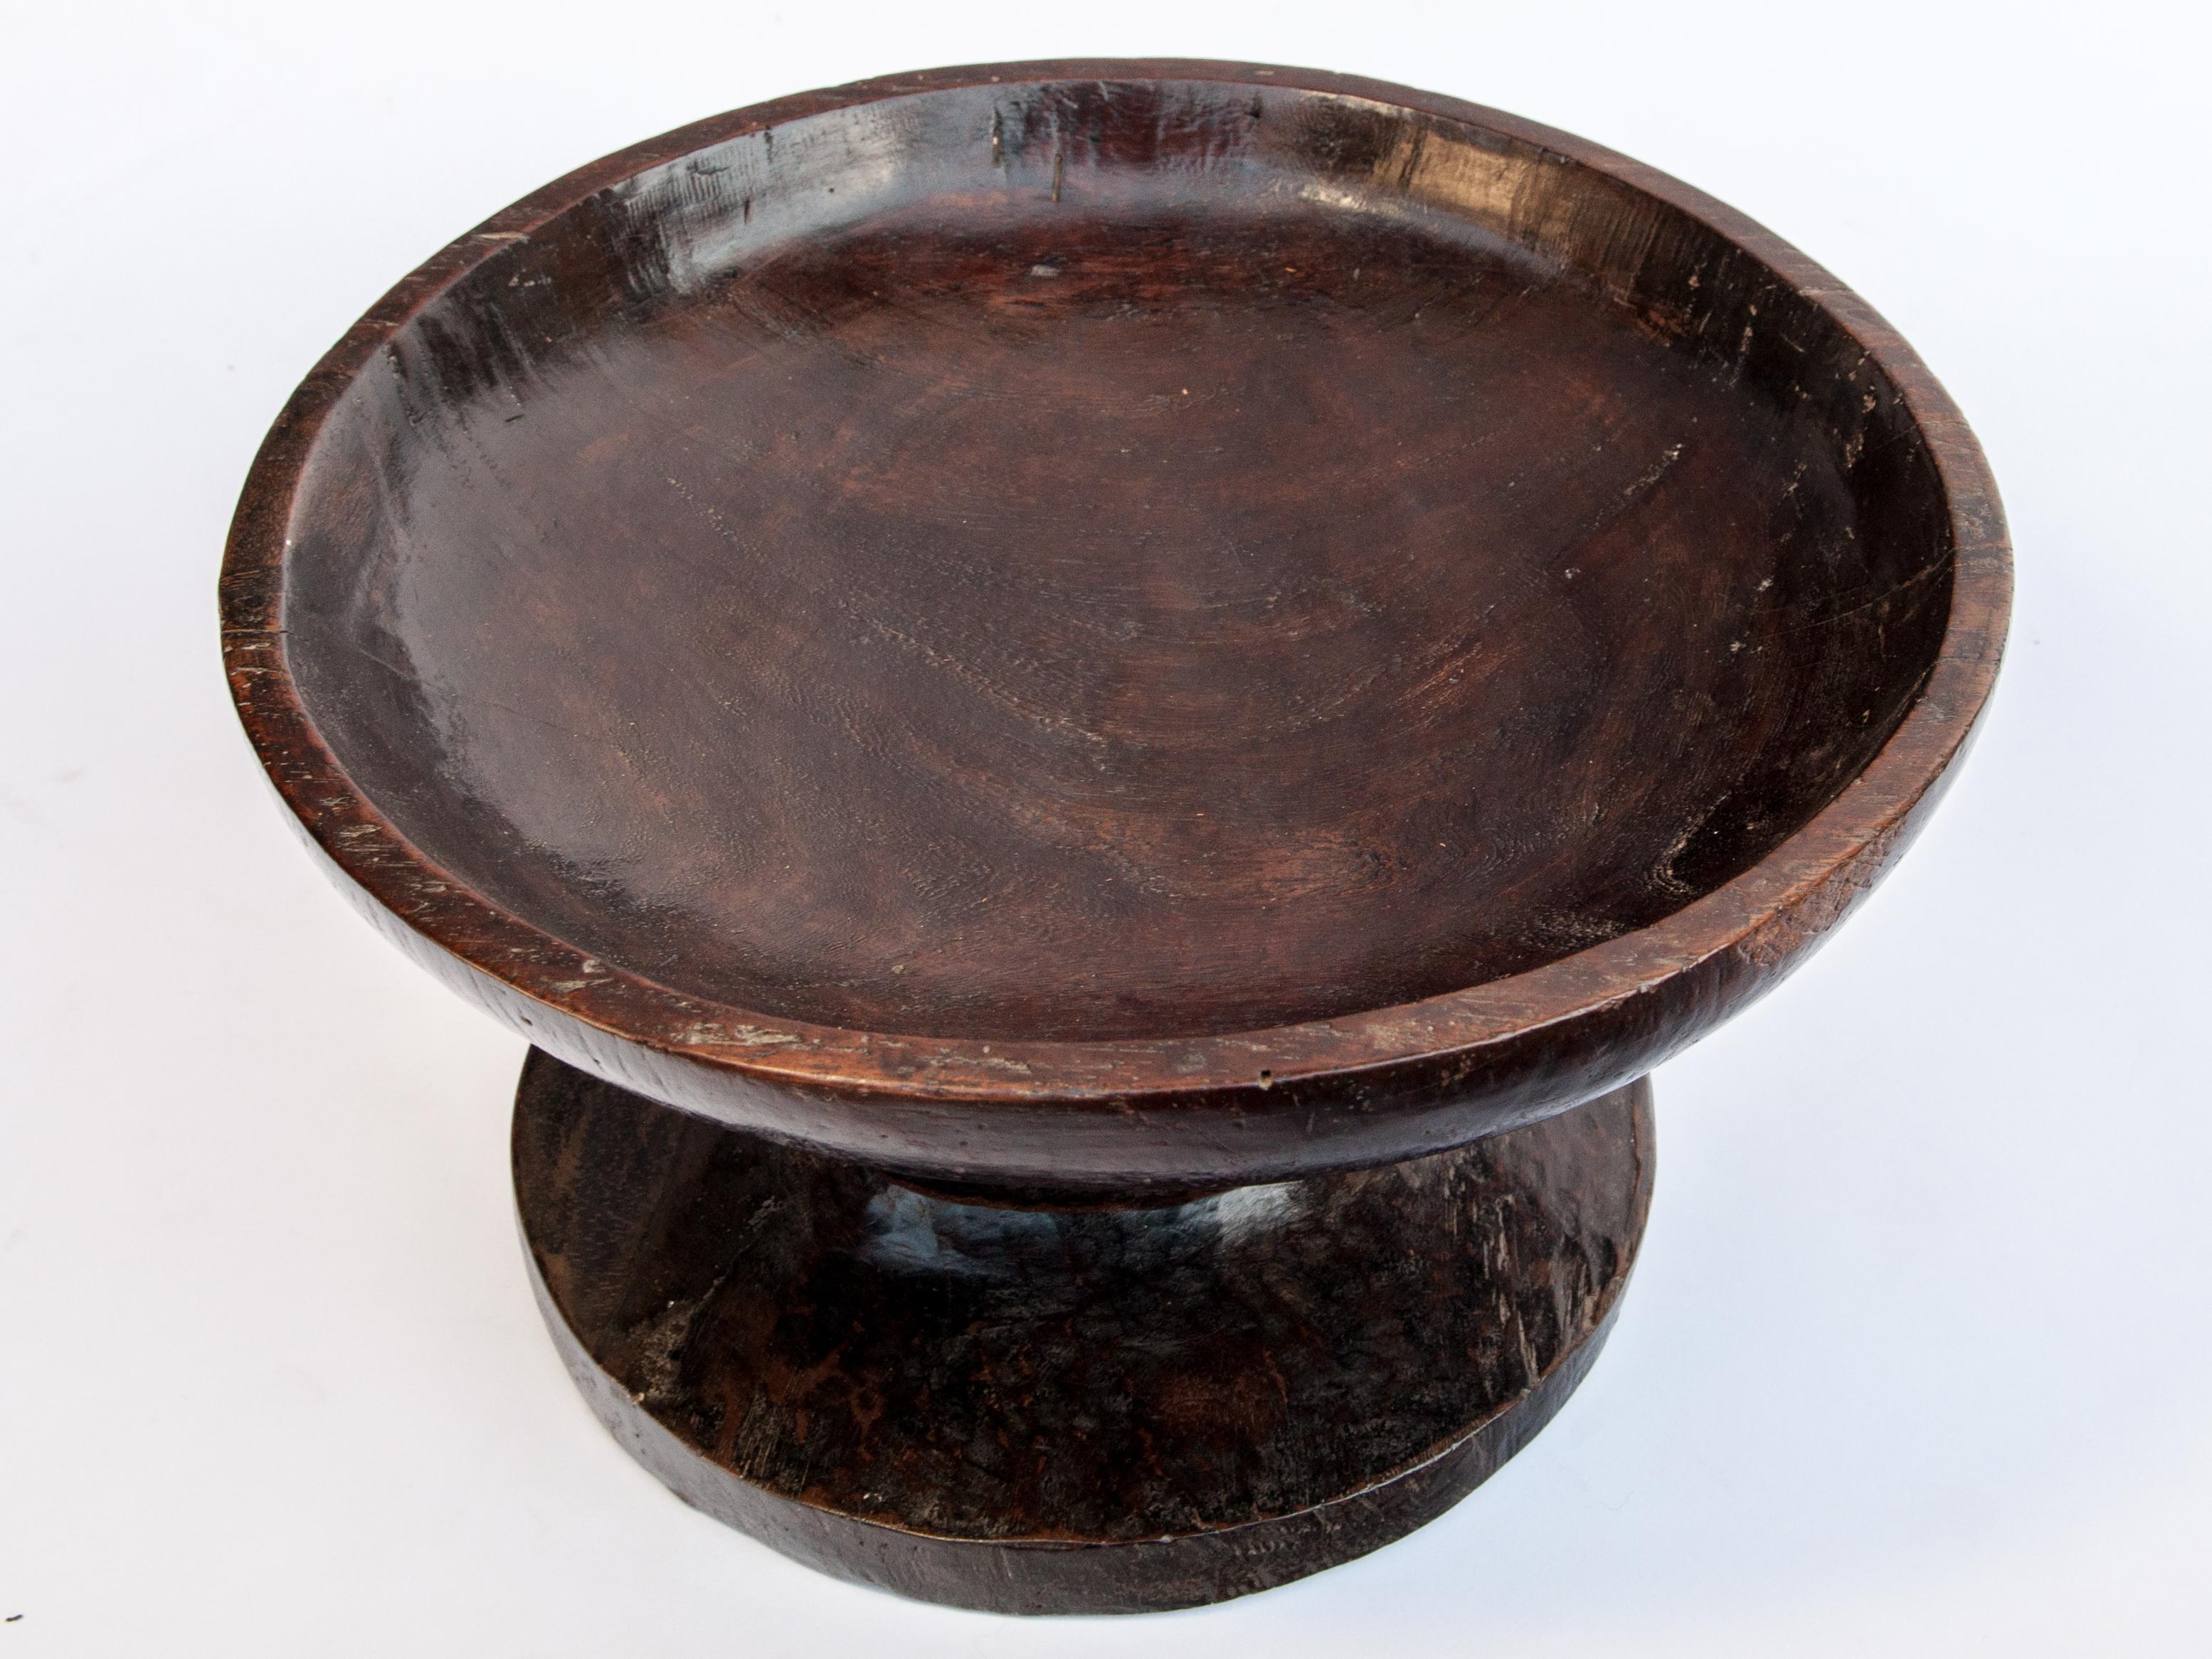 Indonesian Vintage Wood Bowl on Stand from Sulawesi, Indonesia, Mid-20th Century